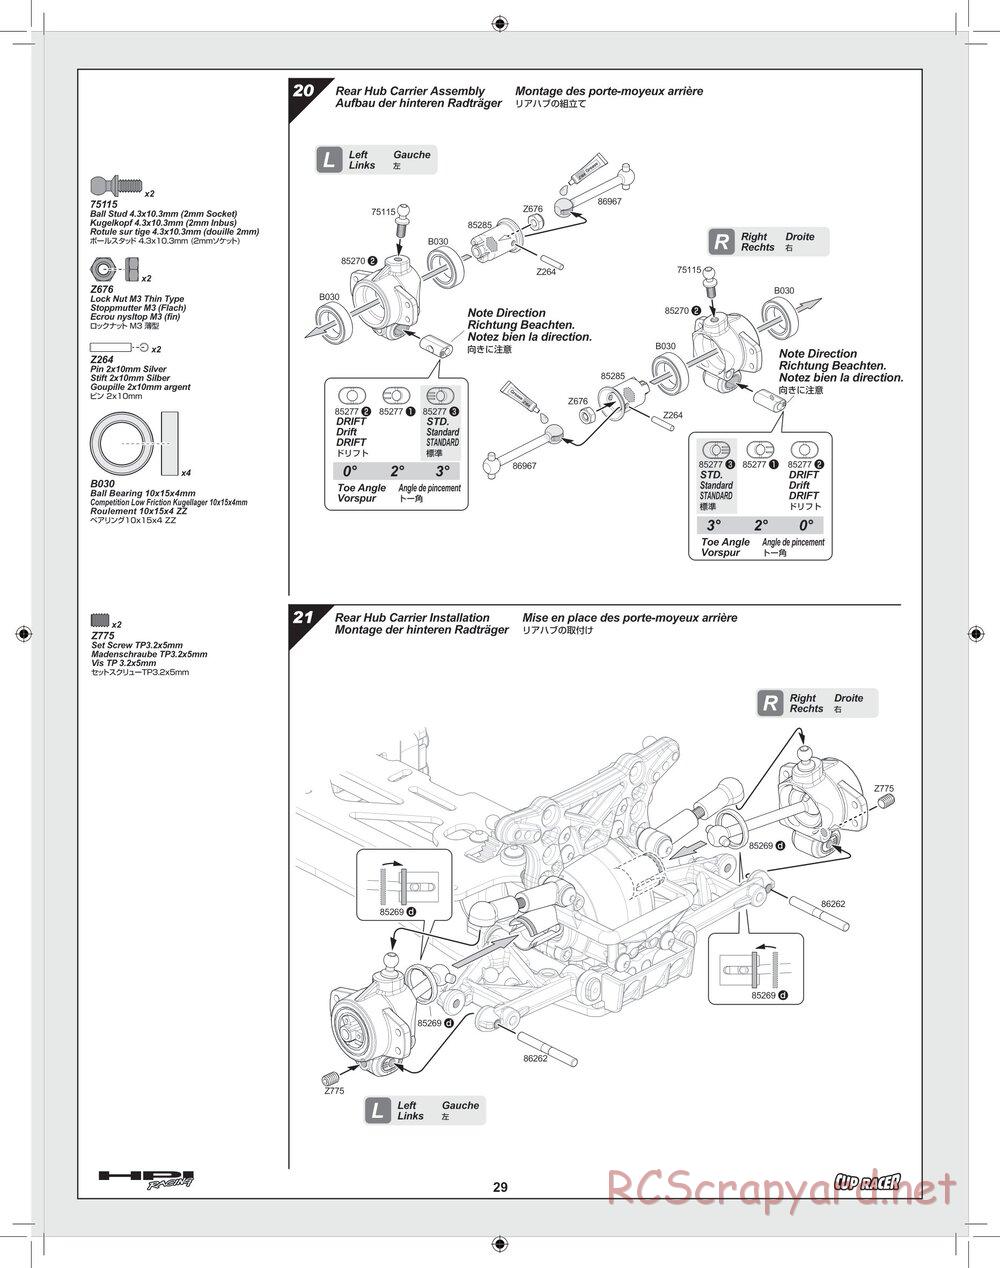 HPI - Cup Racer - Manual - Page 29